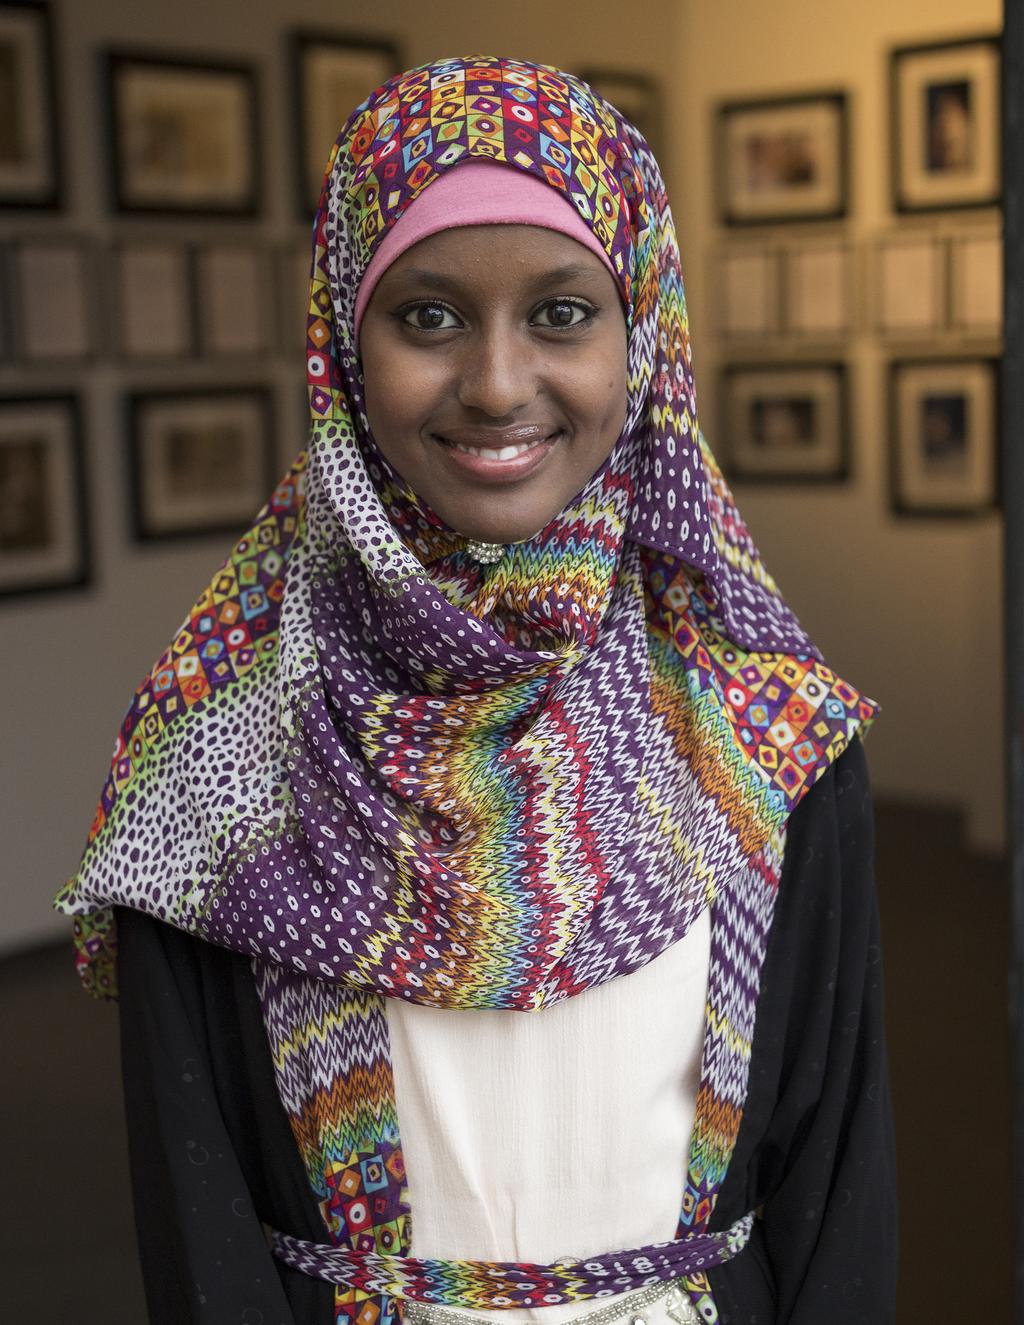 You can help give a voice to students like Zaynab My name is Zaynab Abdi, and I am from Yemen.